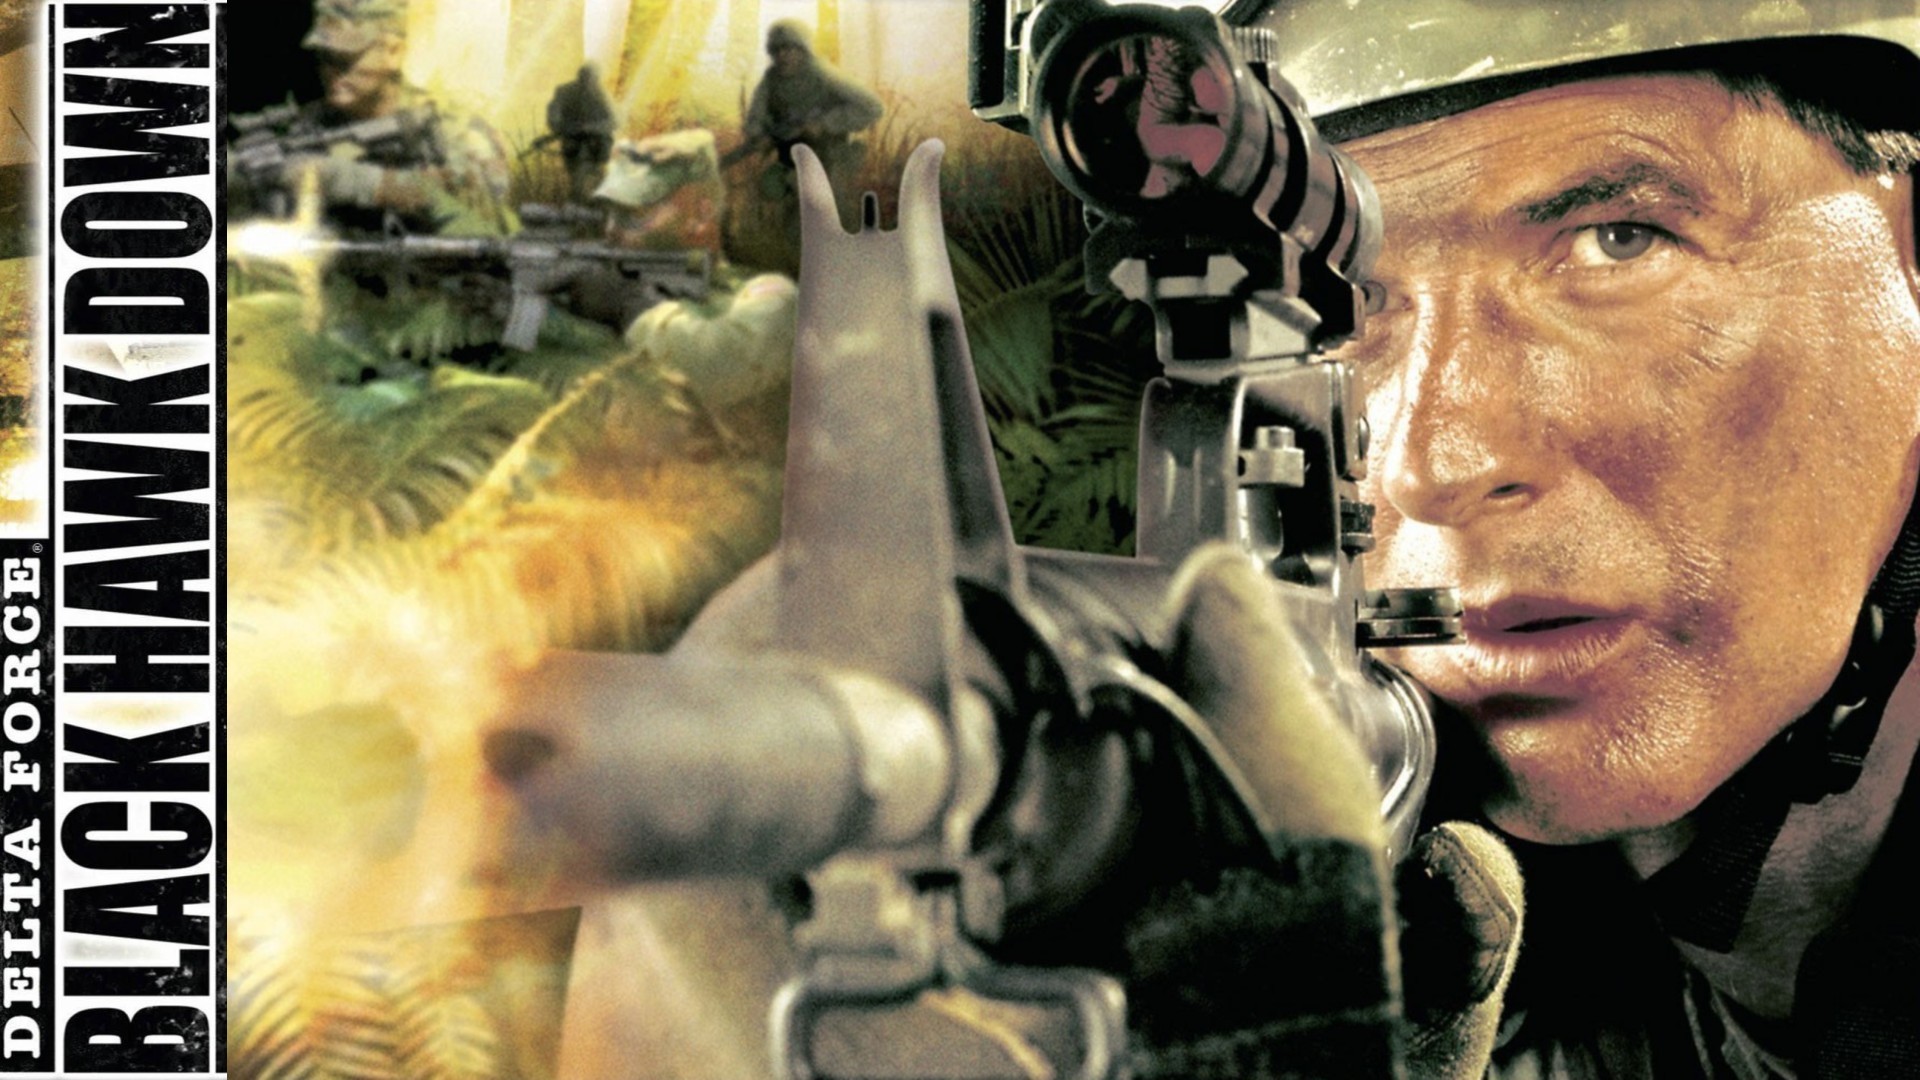 1920x1080 2 Delta Force: Black Hawk Down - Team Sabre HD Wallpapers | Backgrounds -  Wallpaper Abyss